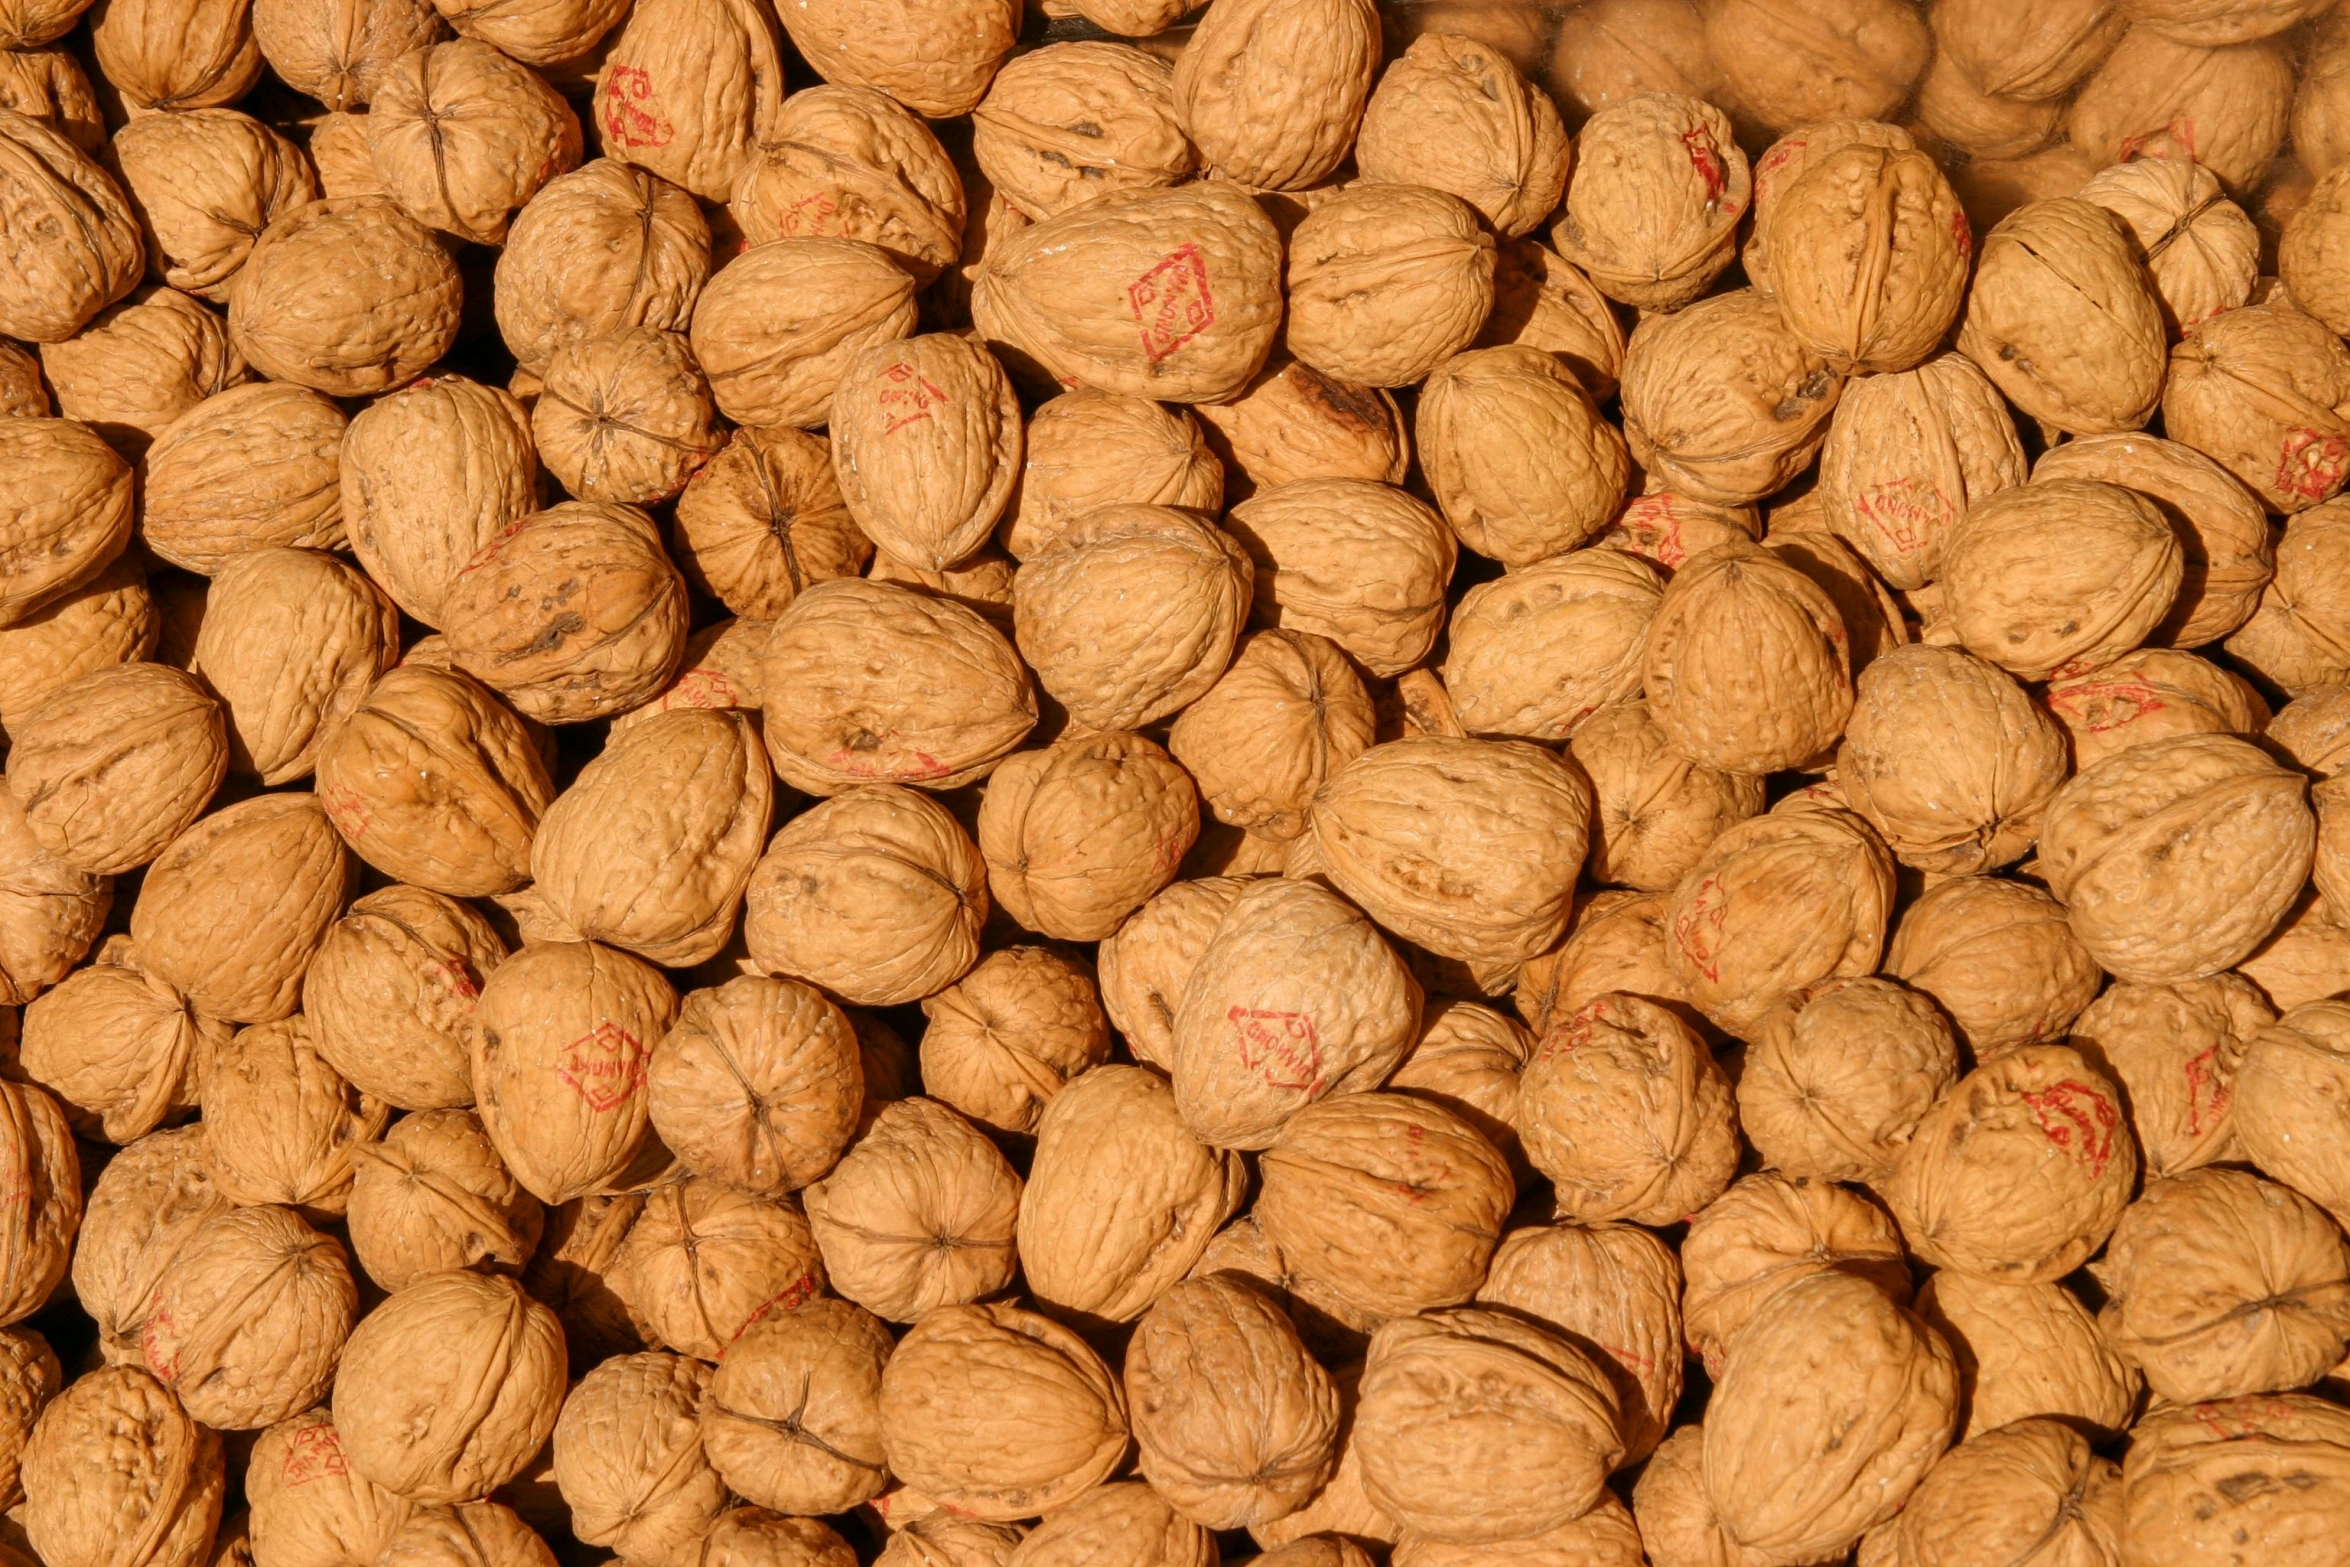 close up view of nuts displayed with text